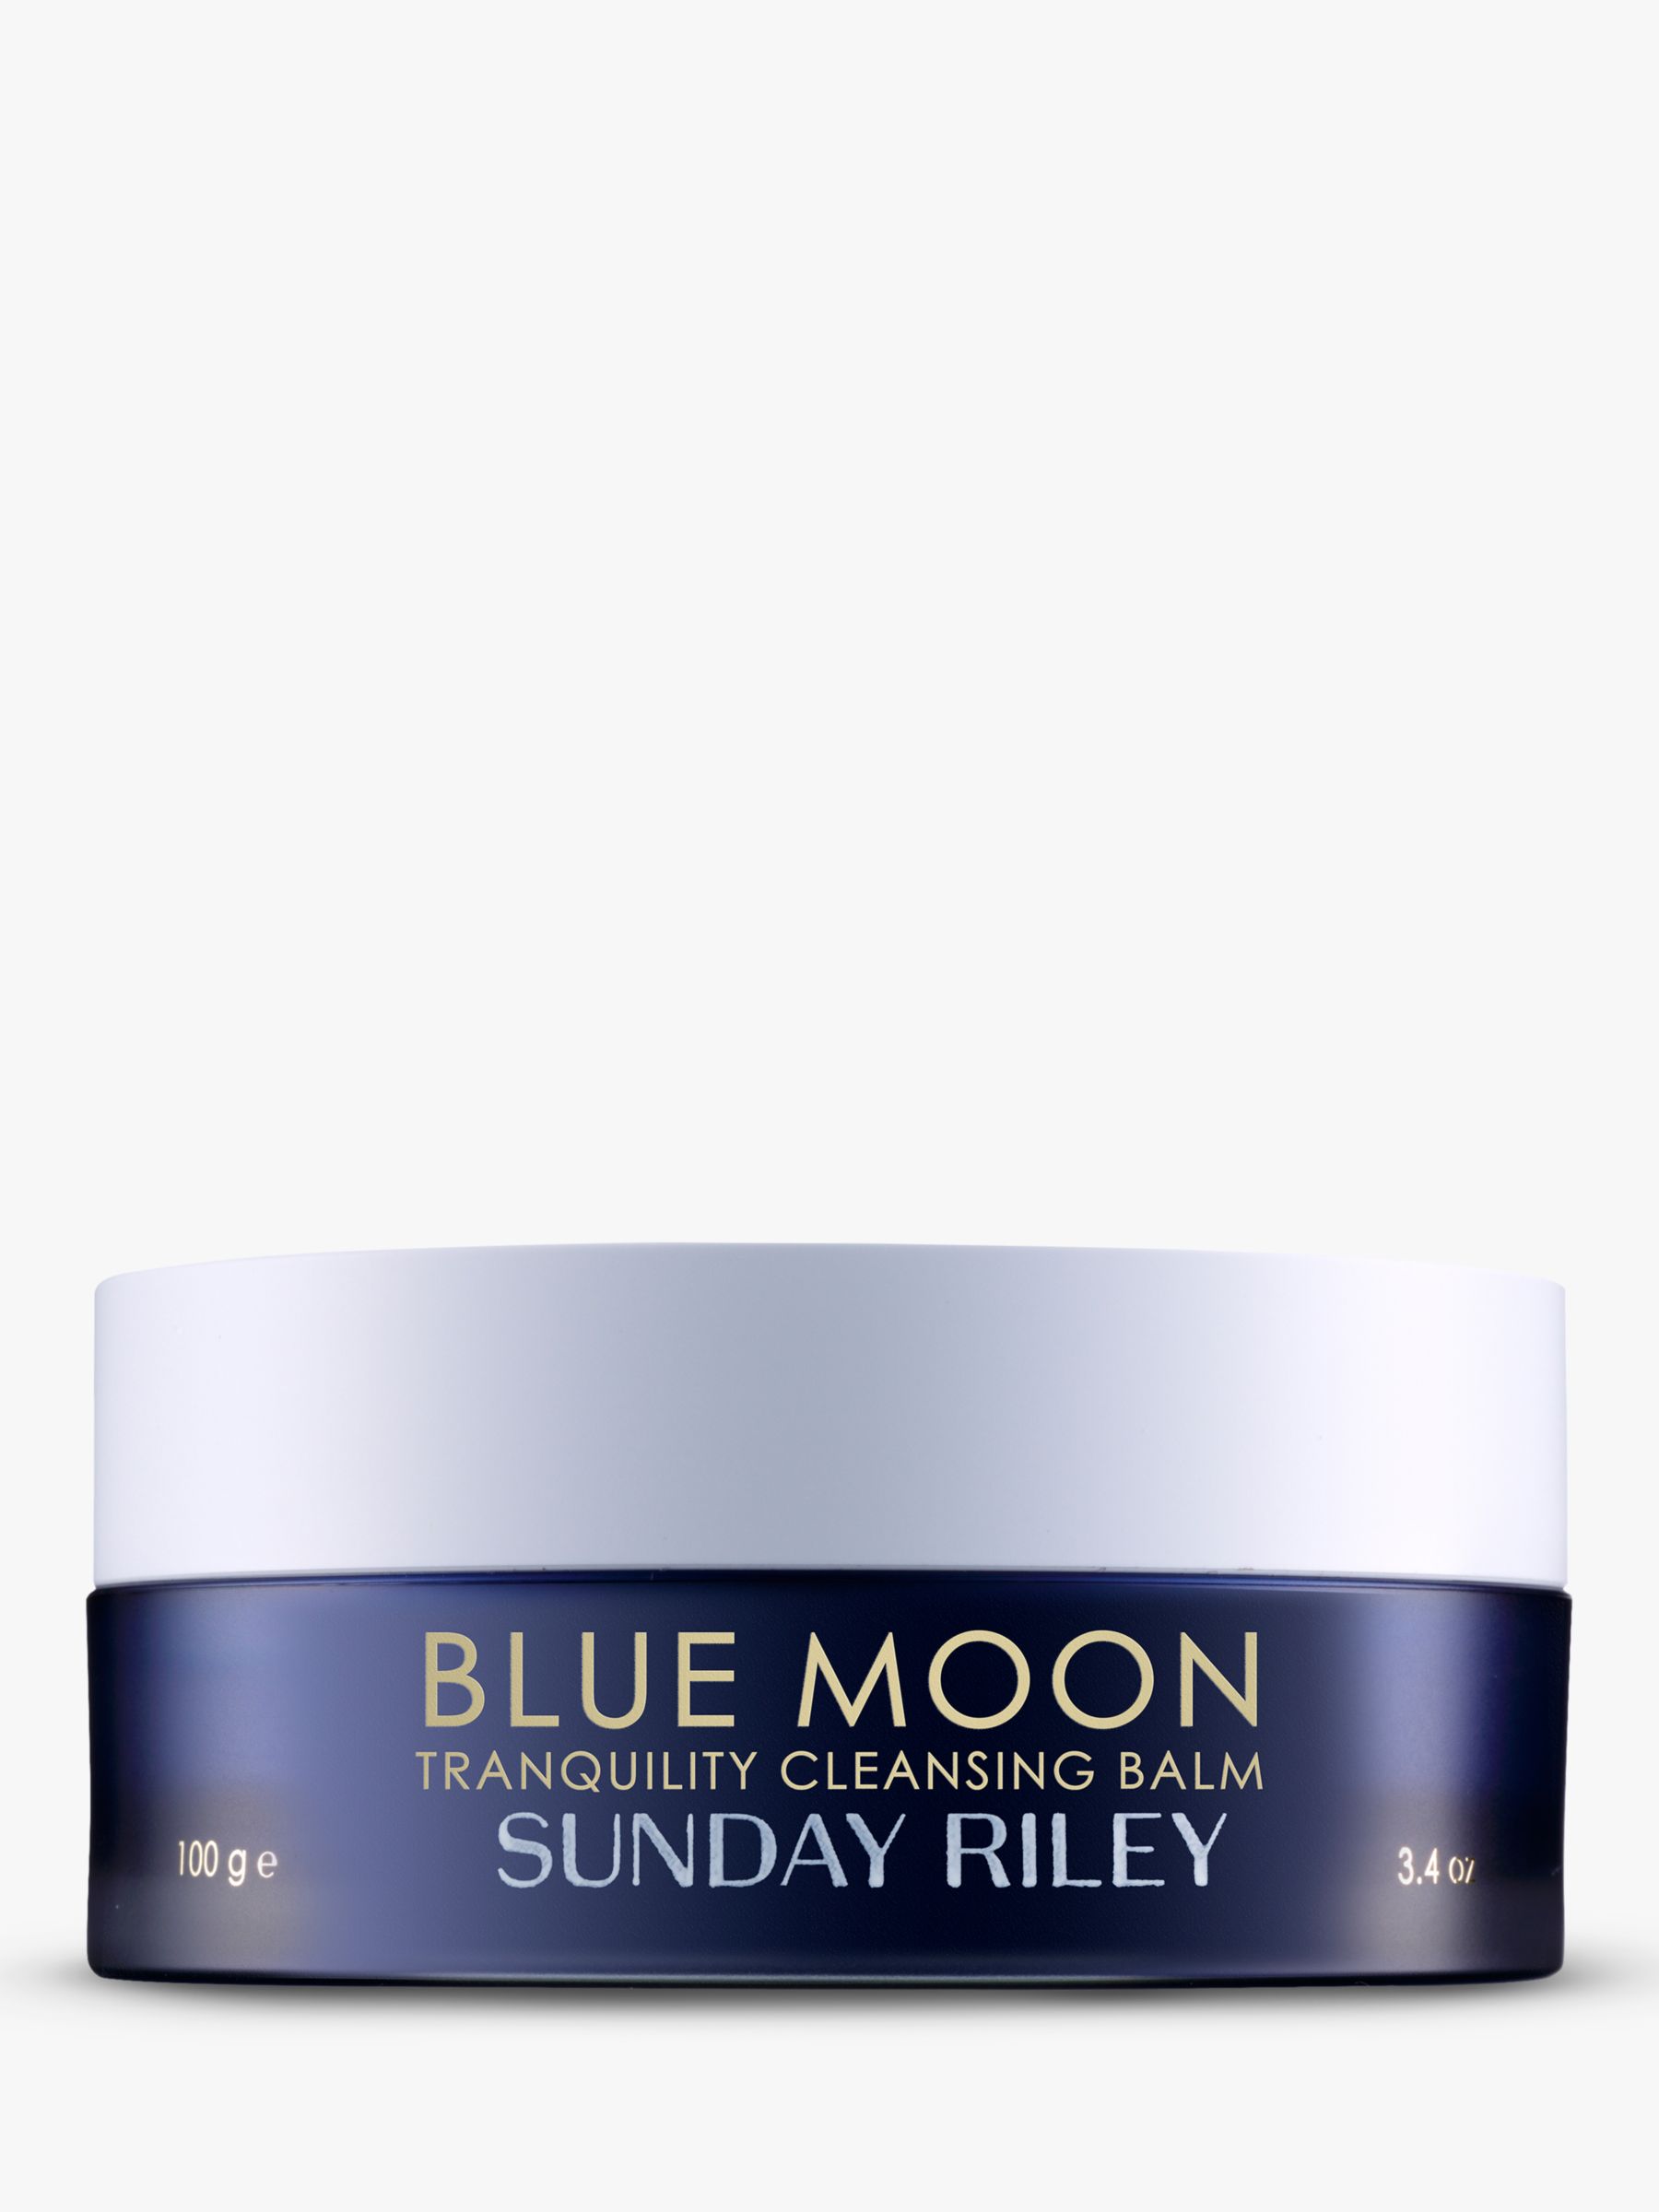 Sunday Riley Blue Moon Tranquility Cleansing Balm, 100g 1